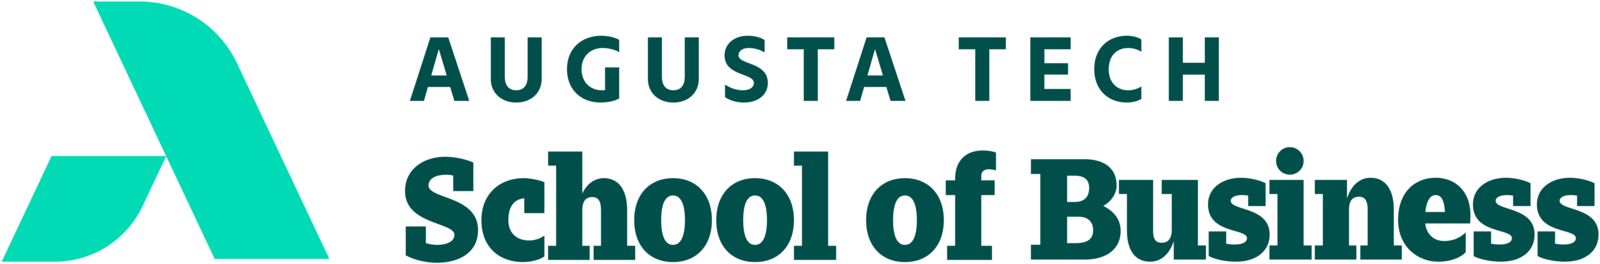 An uppercase abstract A in mint green composed of a smaller leg representing Augusta Technical College supporting the larger leg representing the Augusta Community and economy. The words Augusta Tech and School of Business are in heritage green font to the right of the a, stacked in two horizontal rows with School of Business in bold font.